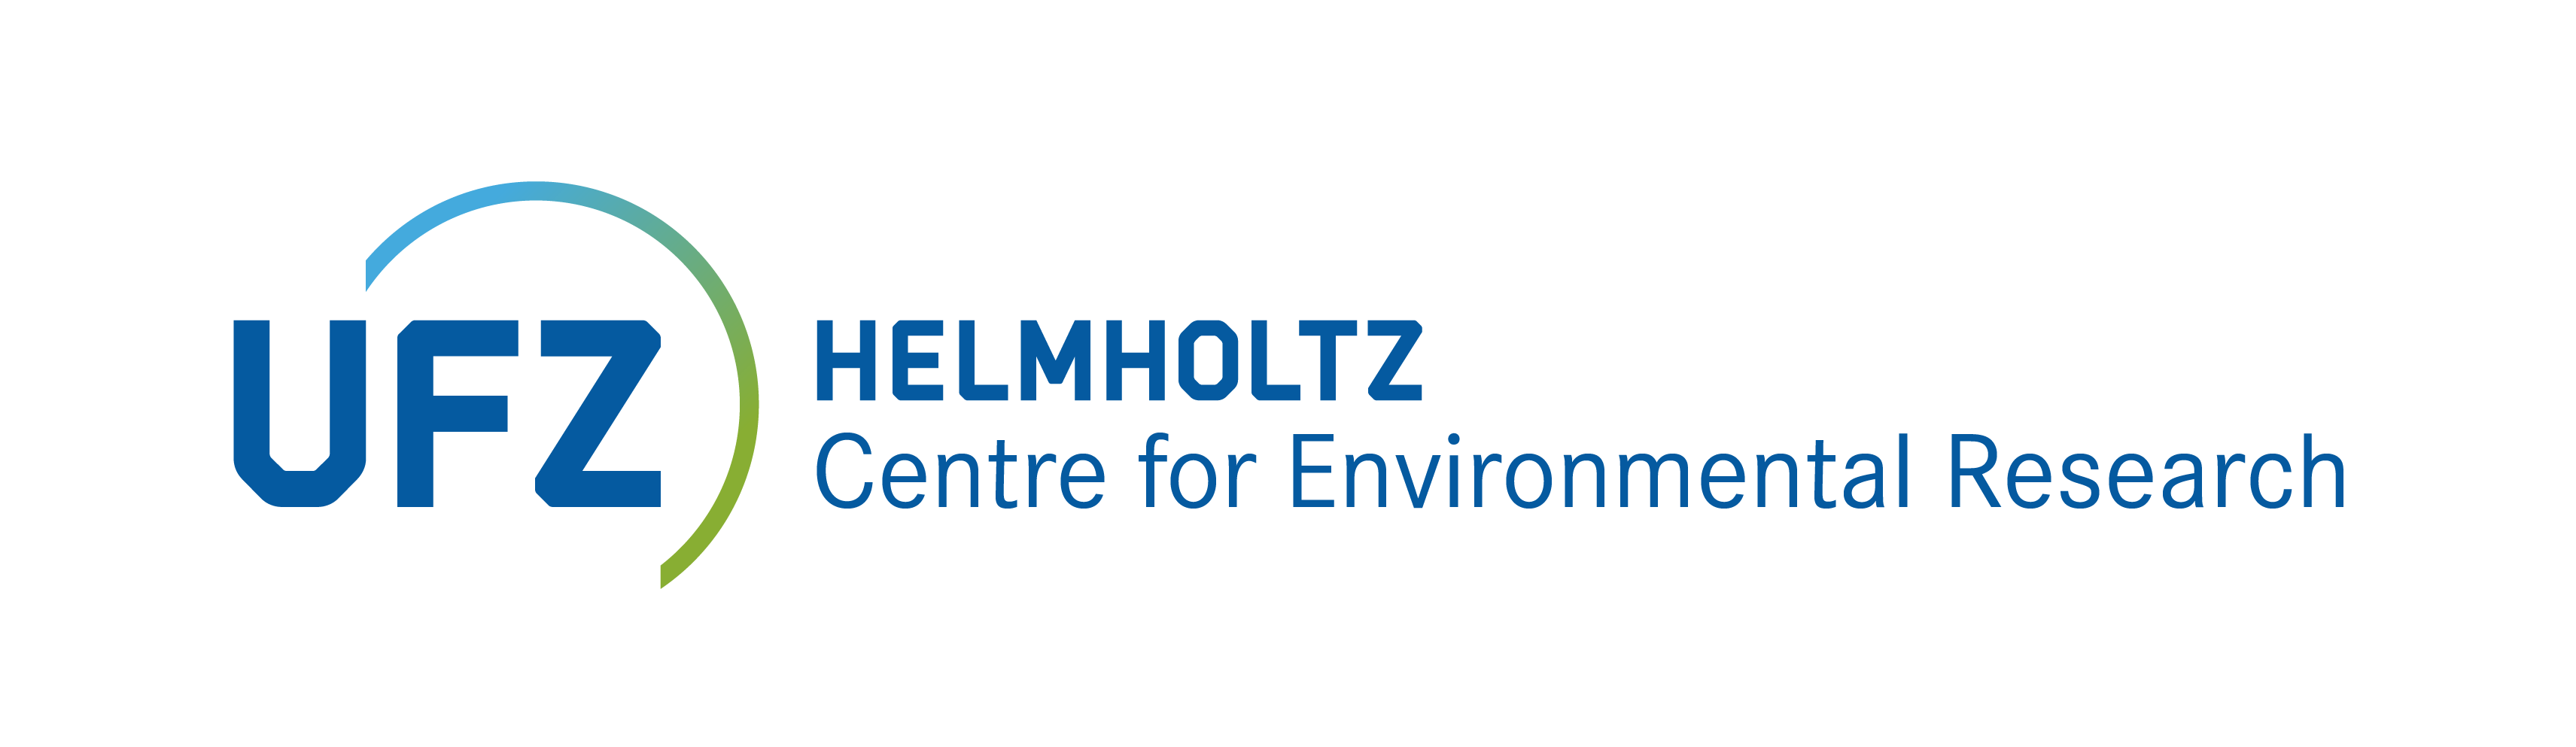 Helmhotz Centre of Environmental Research